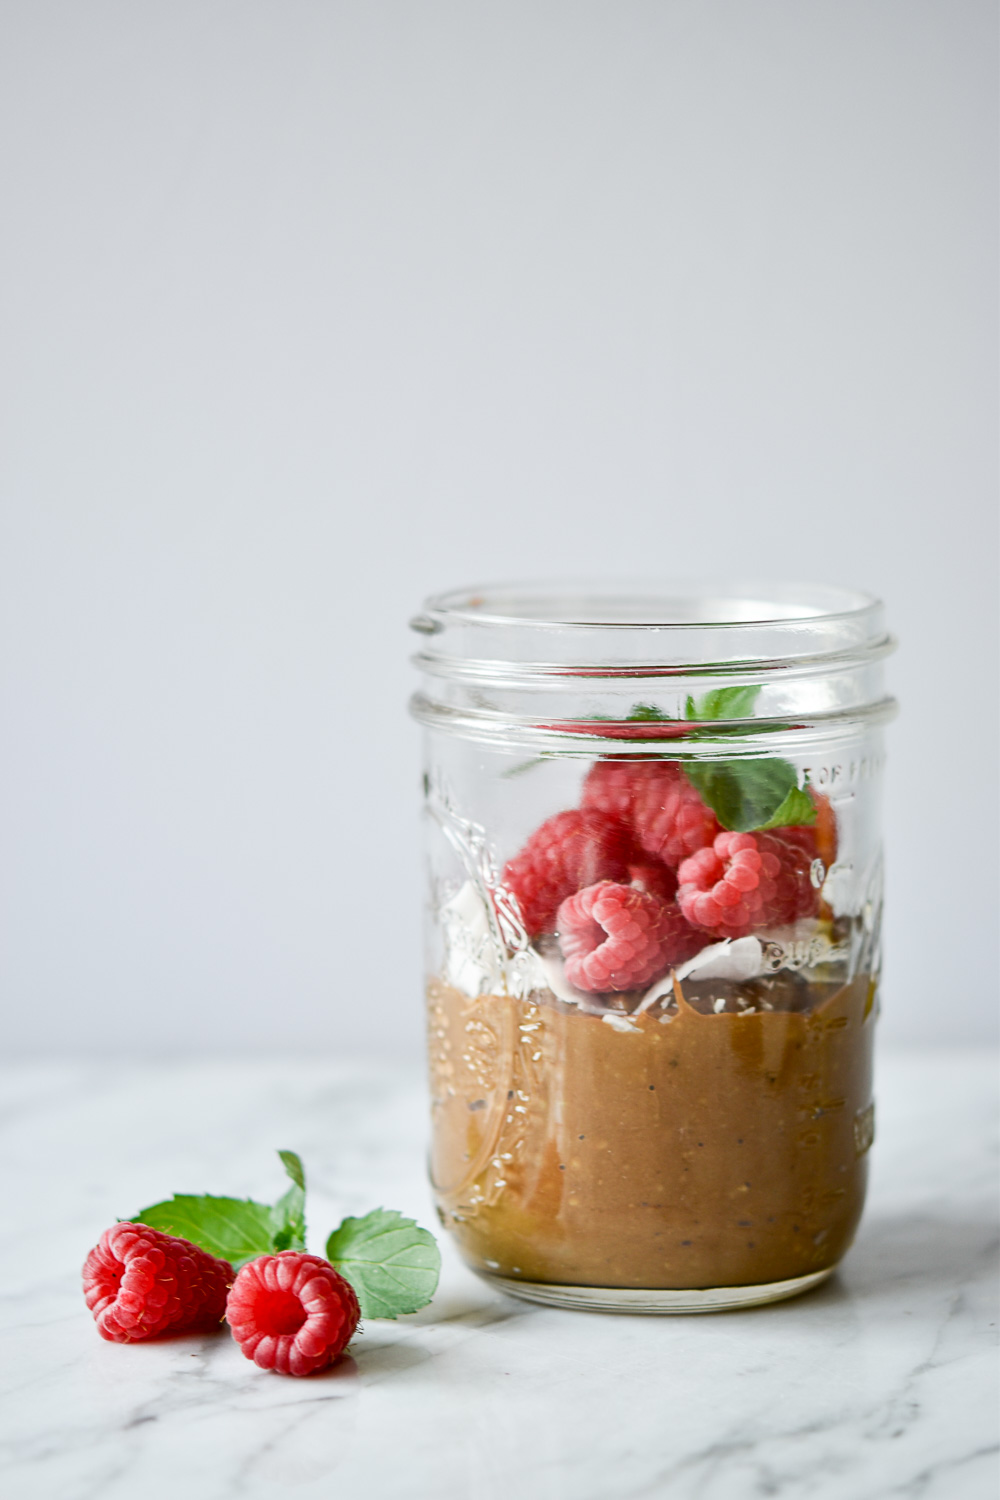 Healthy Cacao Mousse, a holistic resort & a cookbook giveaway